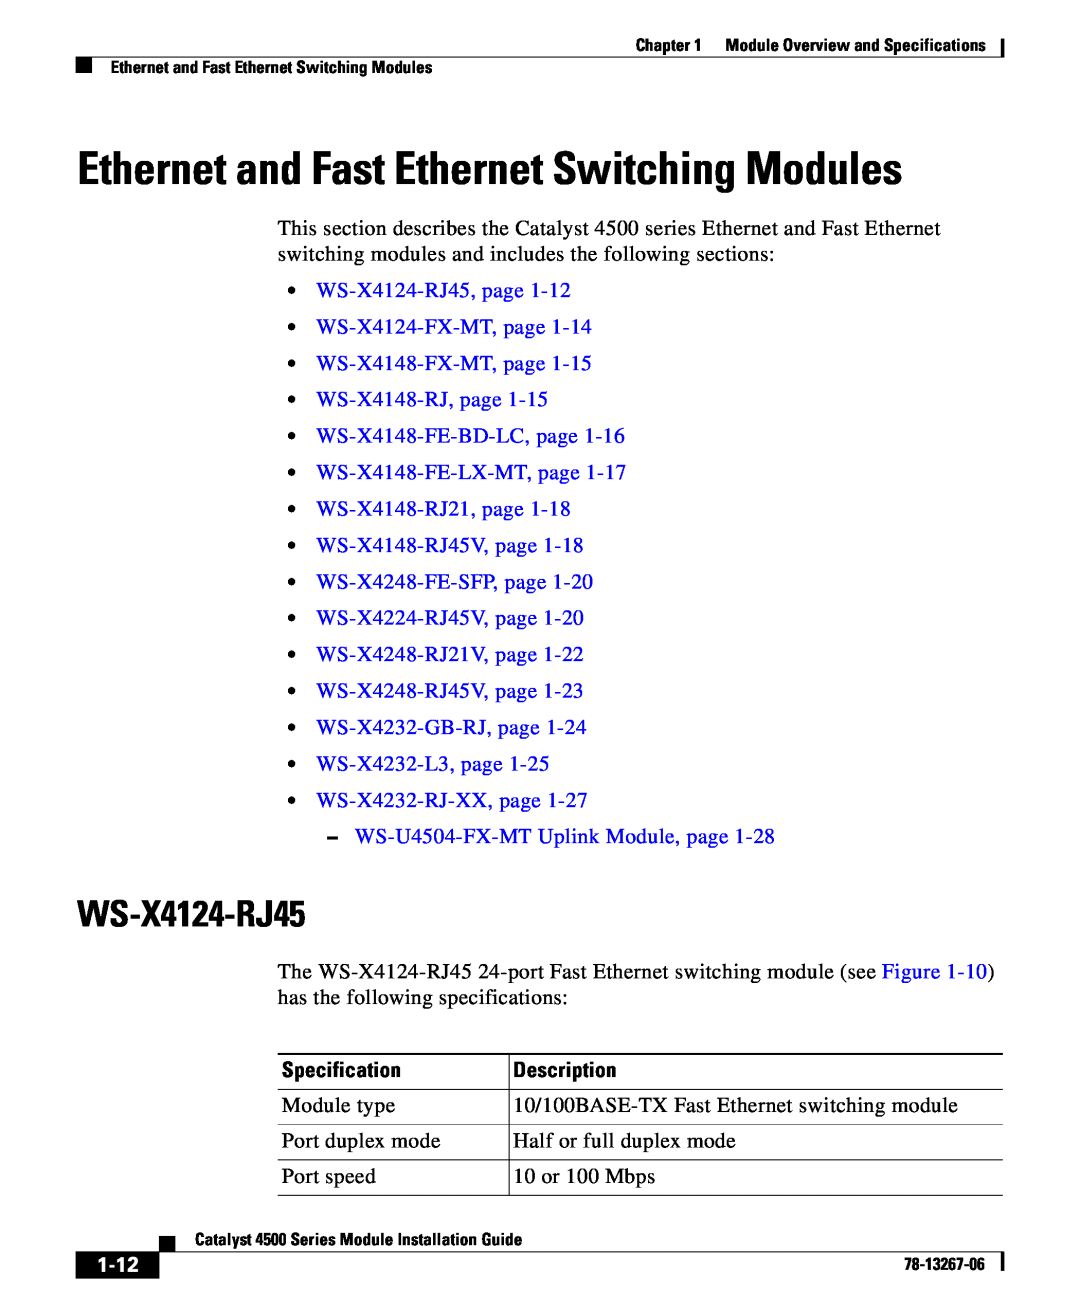 Cisco Systems 4000 Ethernet and Fast Ethernet Switching Modules, WS-X4124-RJ45, Specification, 1-12, Description 